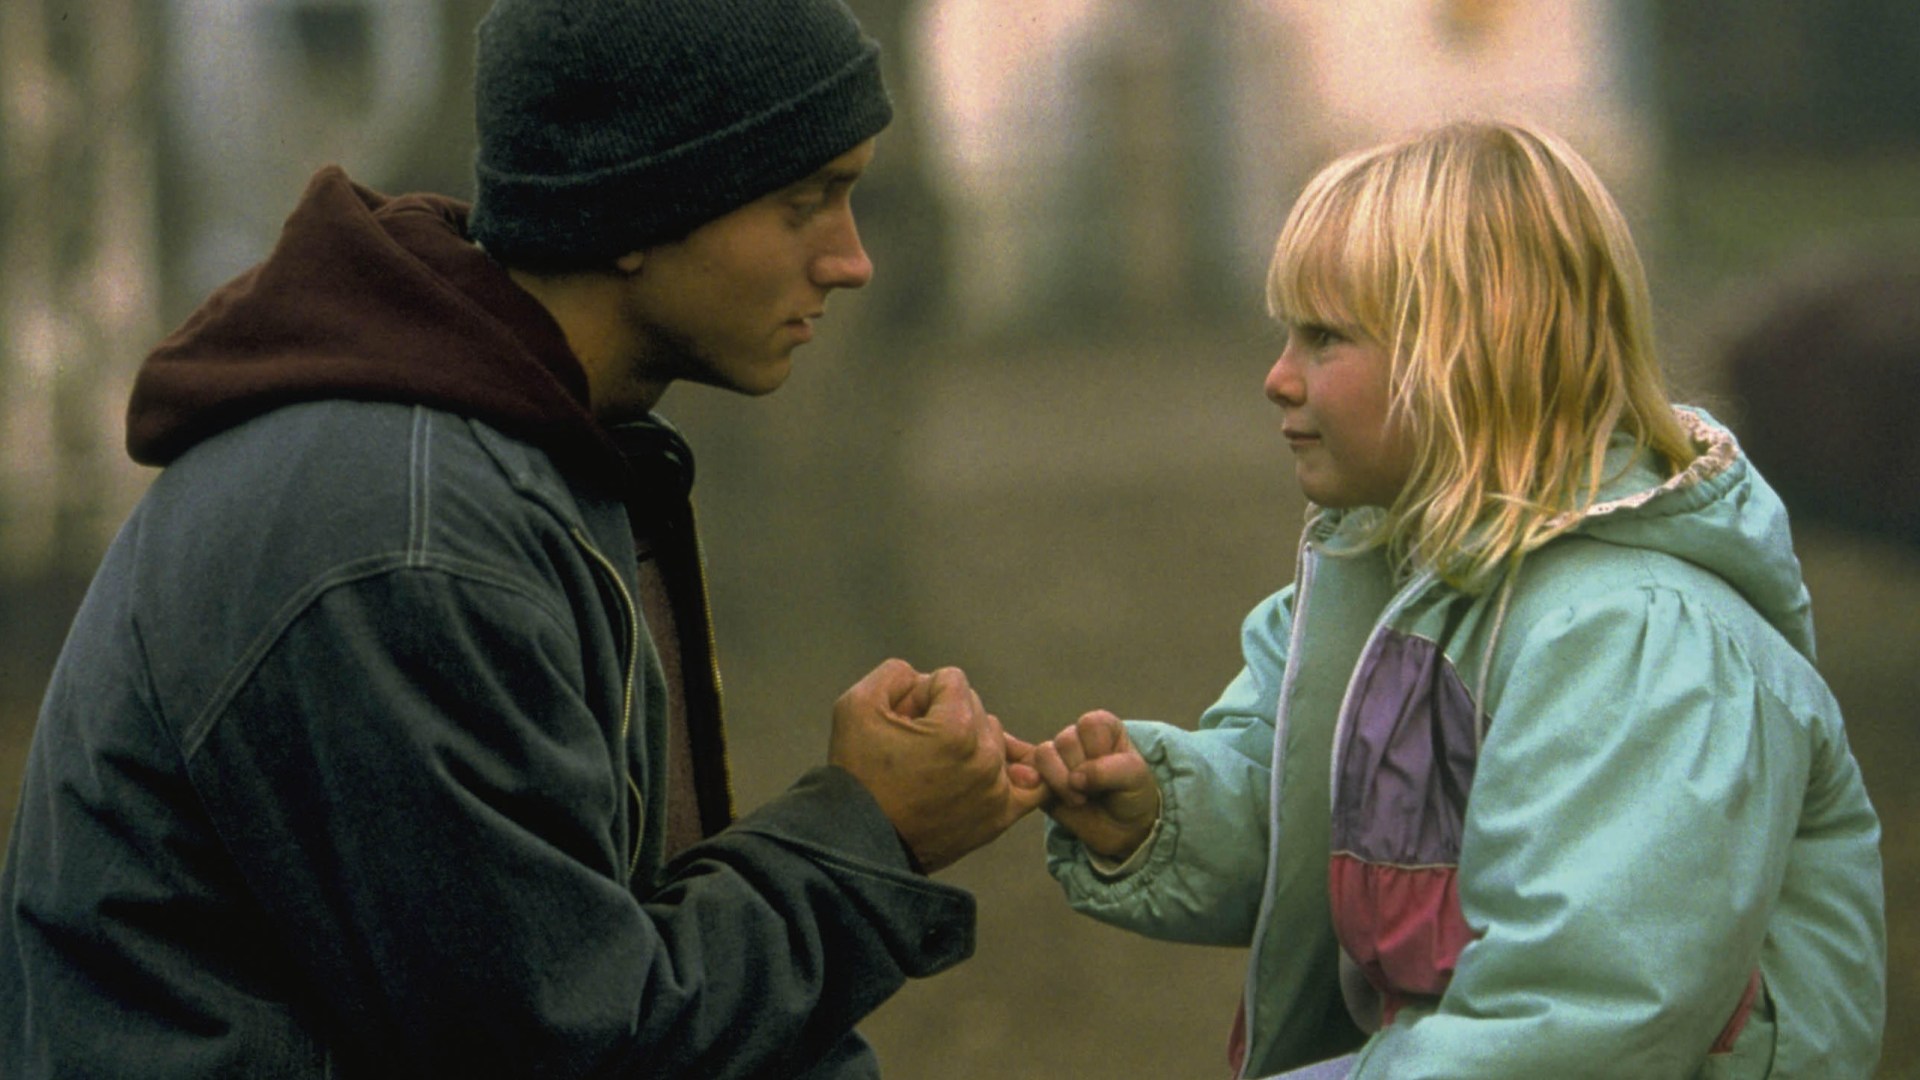 Eminem’s 8 Mile co-star unrecognisable 21 years after hit film